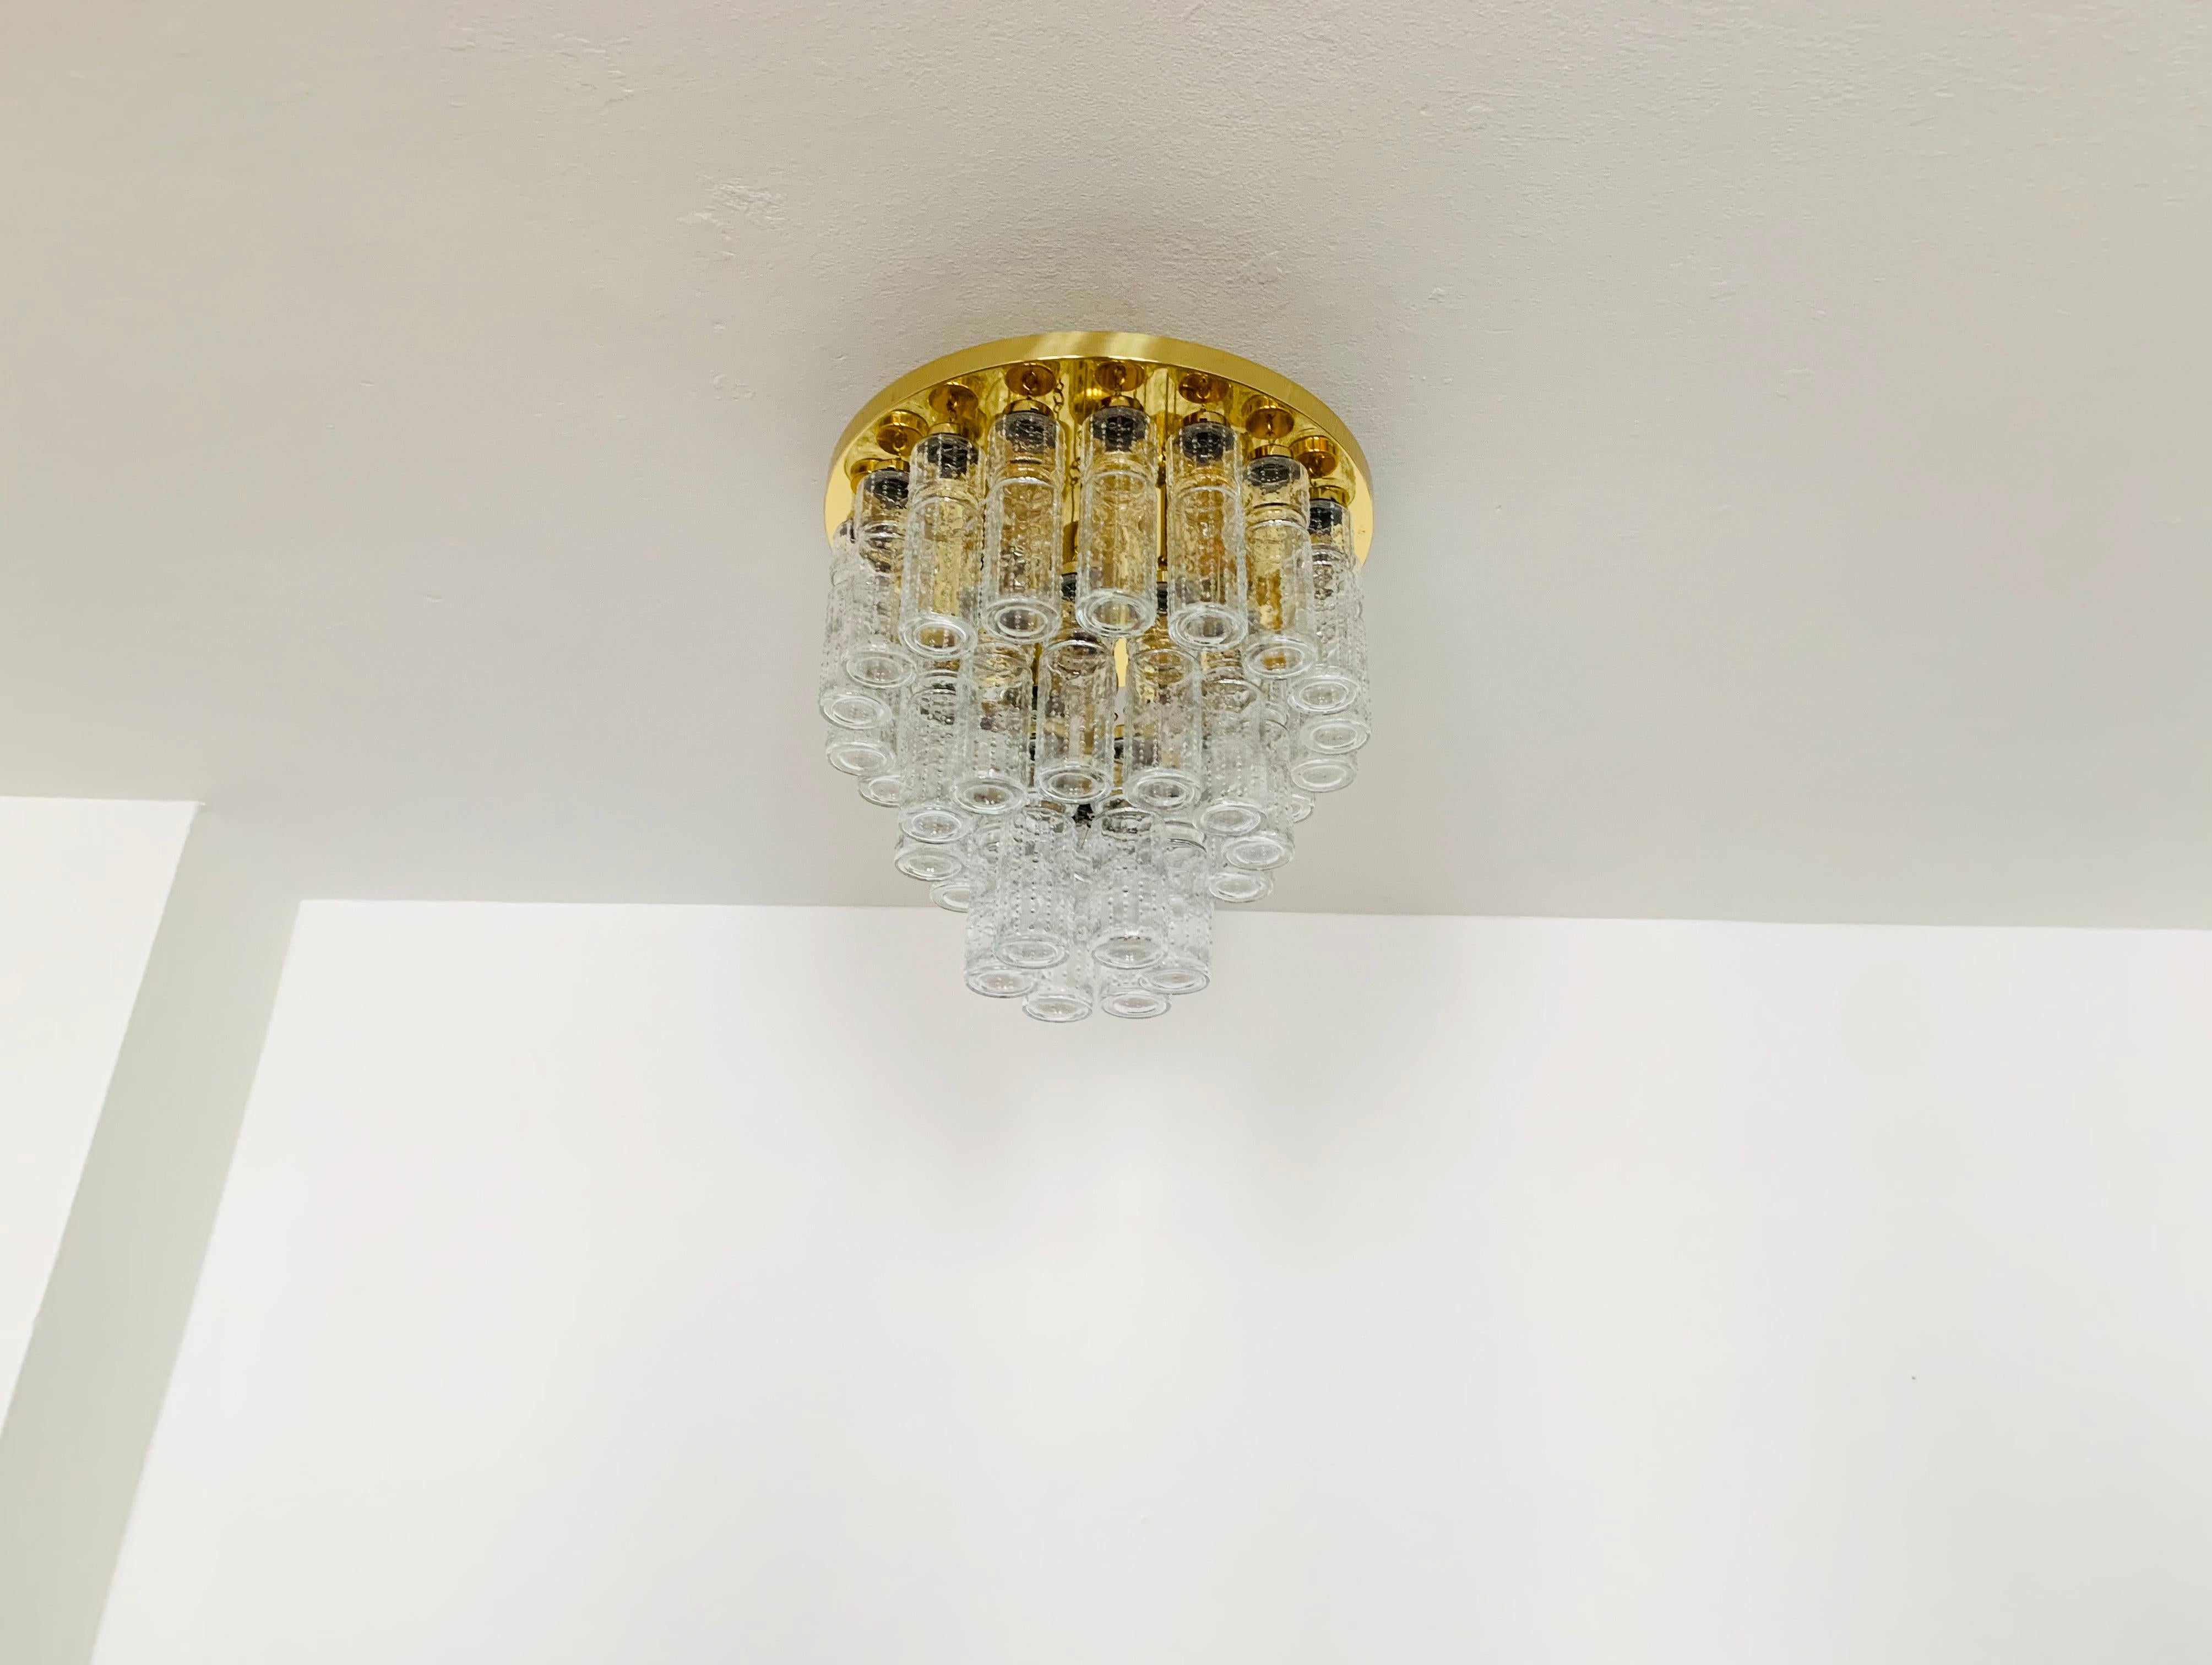 Impressive ice glass ceiling lamp from the Limburg glassworks around 1960.
The lamp spreads a wonderful play of light and is a real eye-catcher.
The 36 glass elements are suspended on 3 levels.
Very elegant design and high-quality